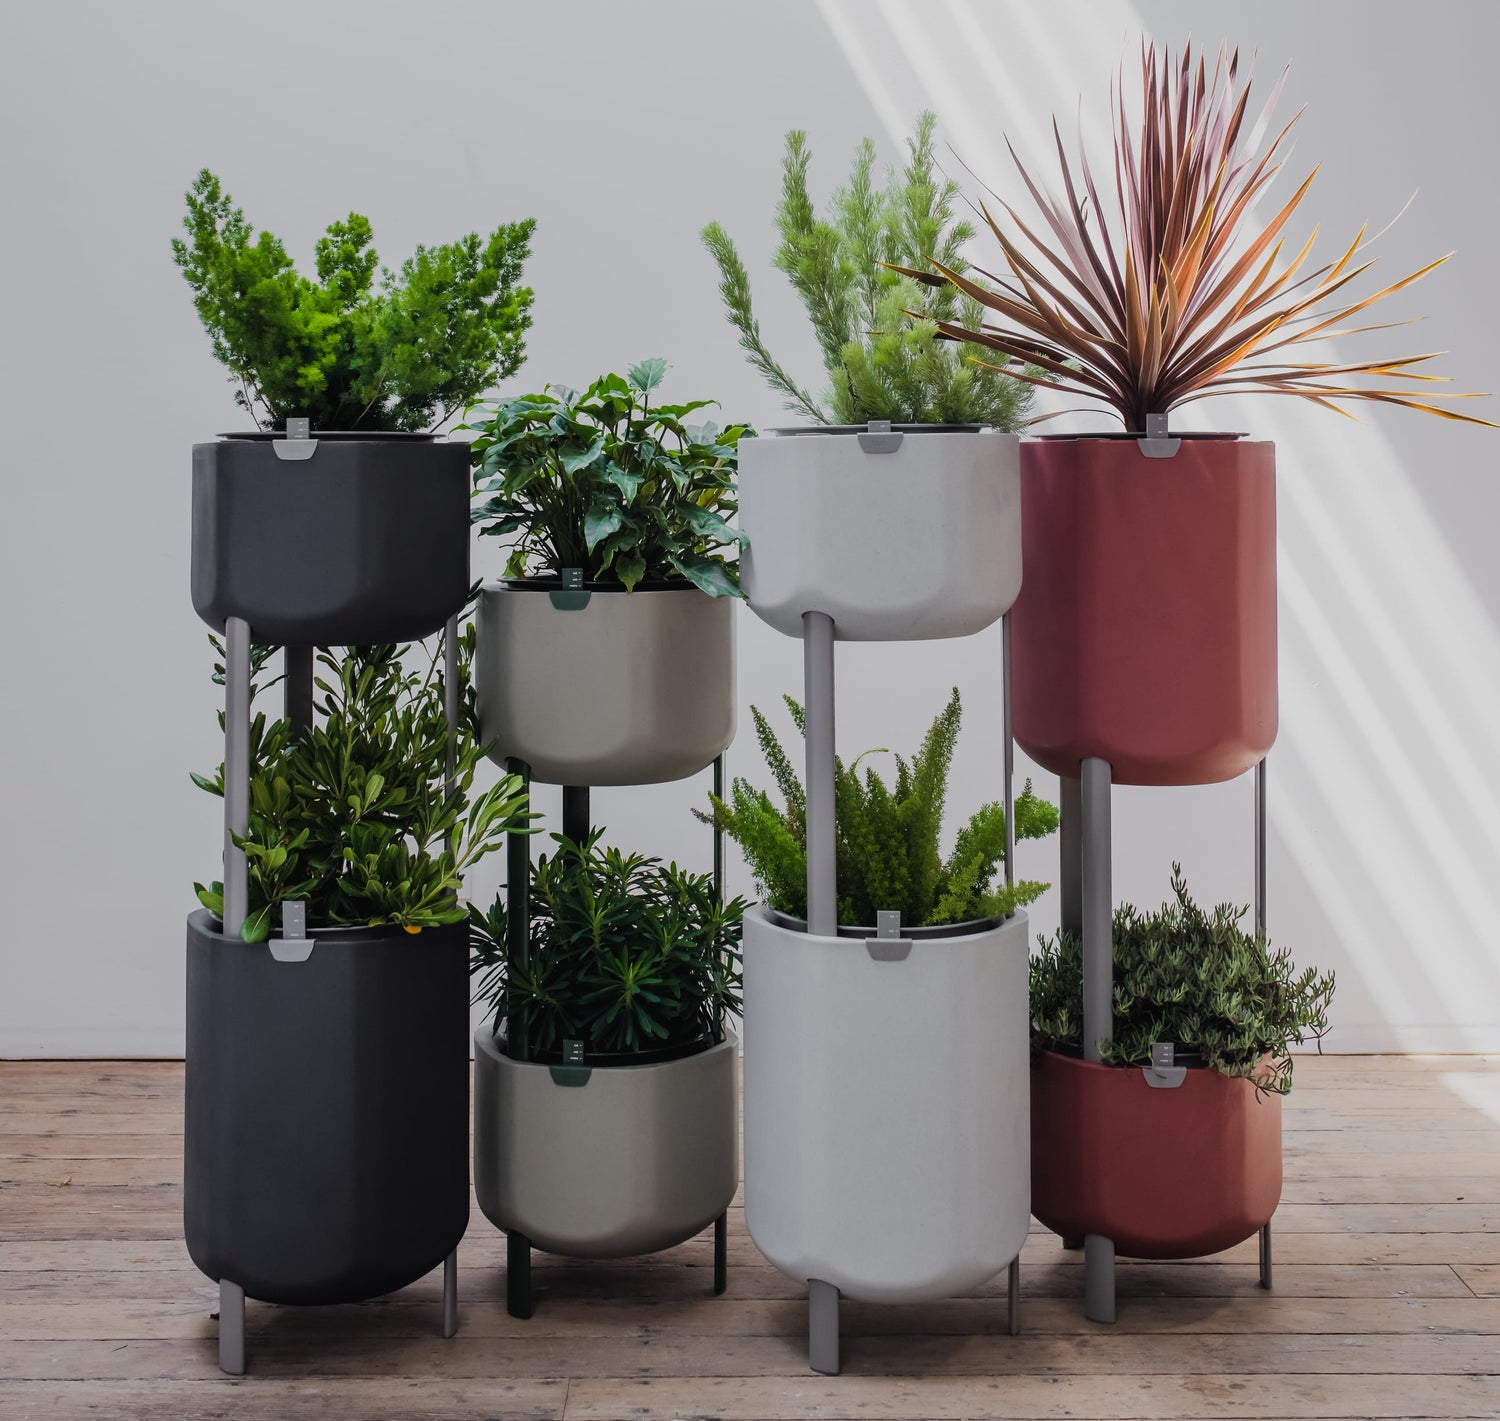 Marly's Self Watering Planters